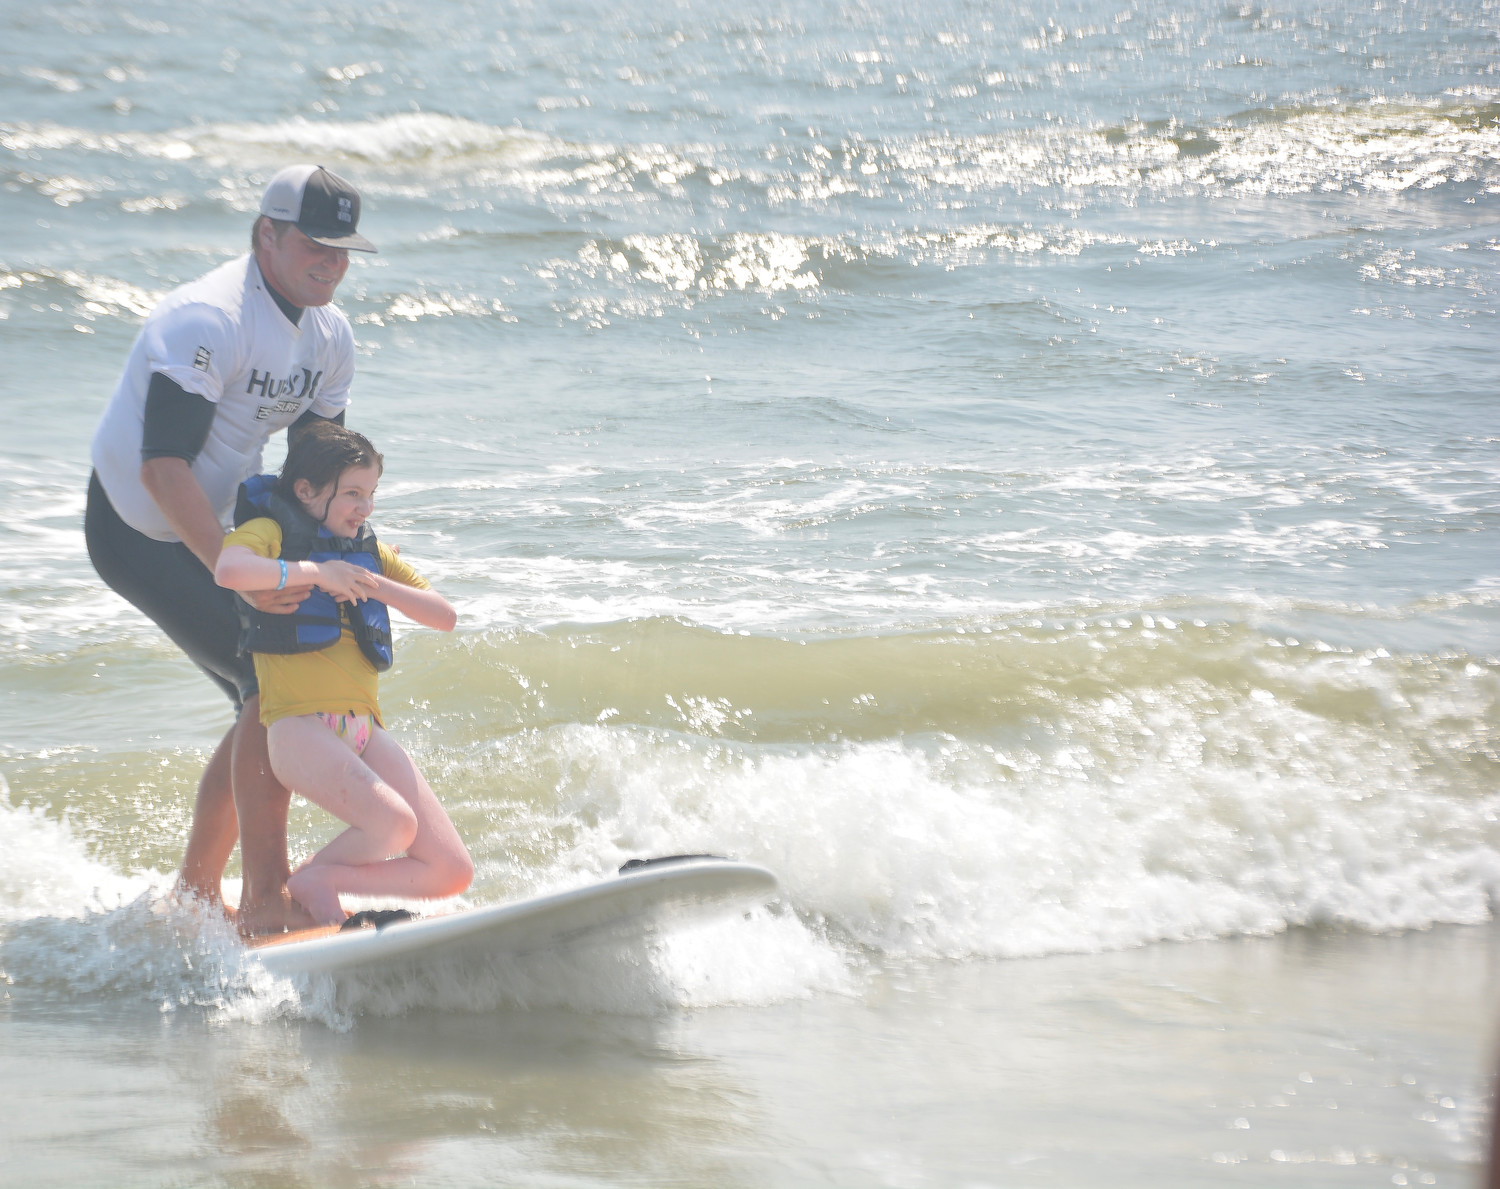 Teadora Wollemberg experienced the thrill of surfing with instructor Cliff Skudin.